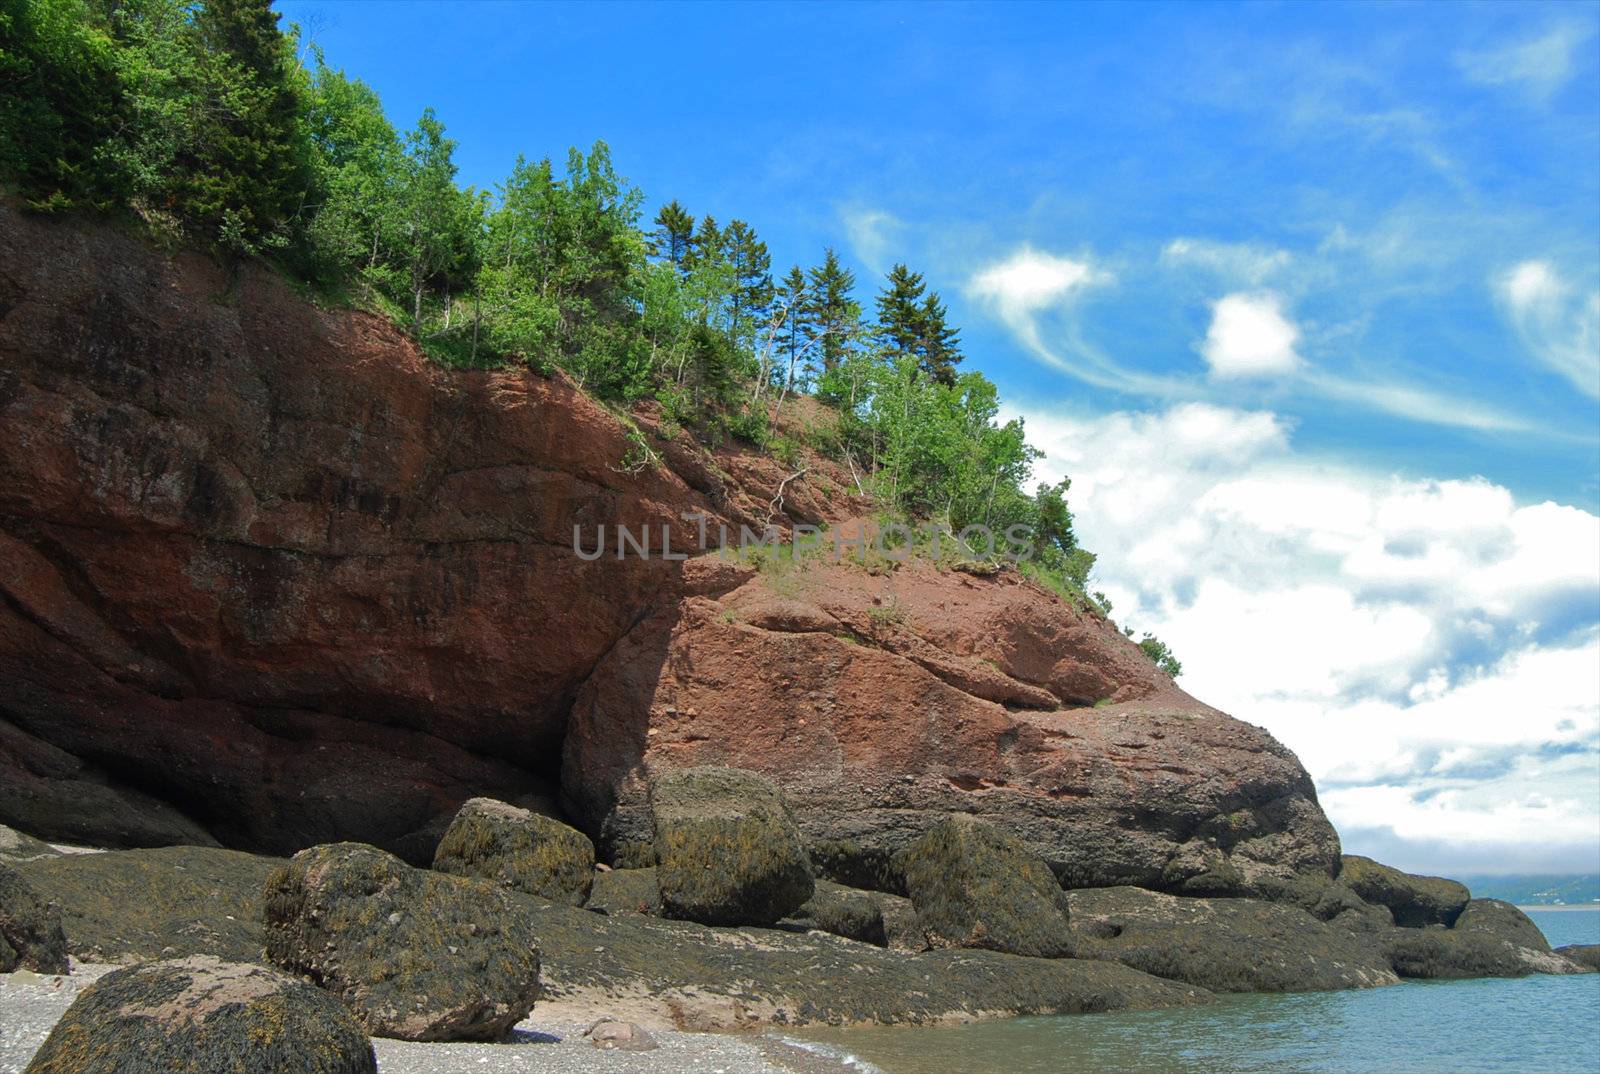 These sea cliffs are located in New Brunswick's Fundy National Park, on the Bay of Fundy.